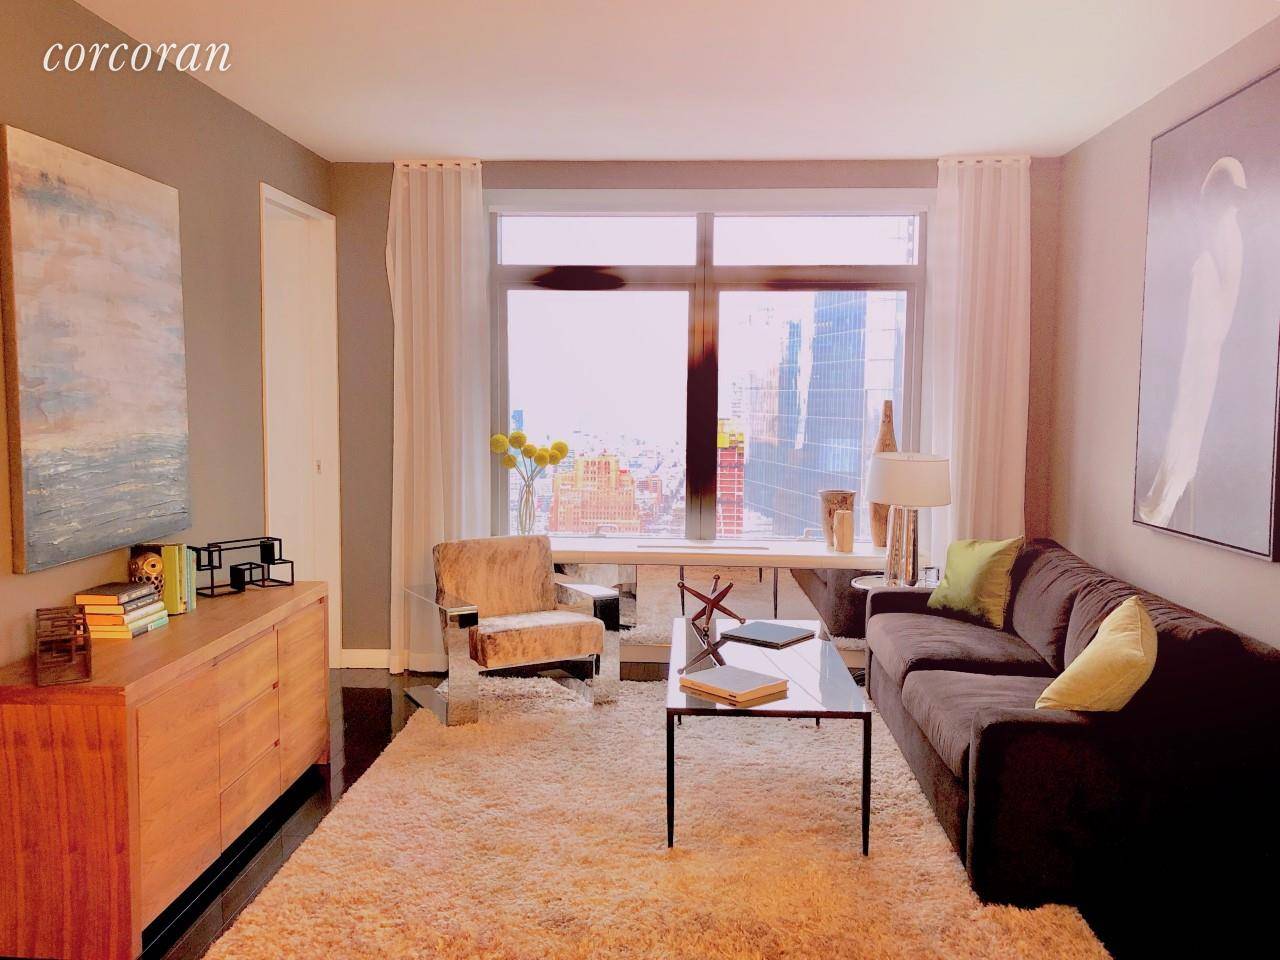 FULLY FURNISHEDMagnificent super luxury high rise close to both the Financial District, Battery Park City and Tribeca.